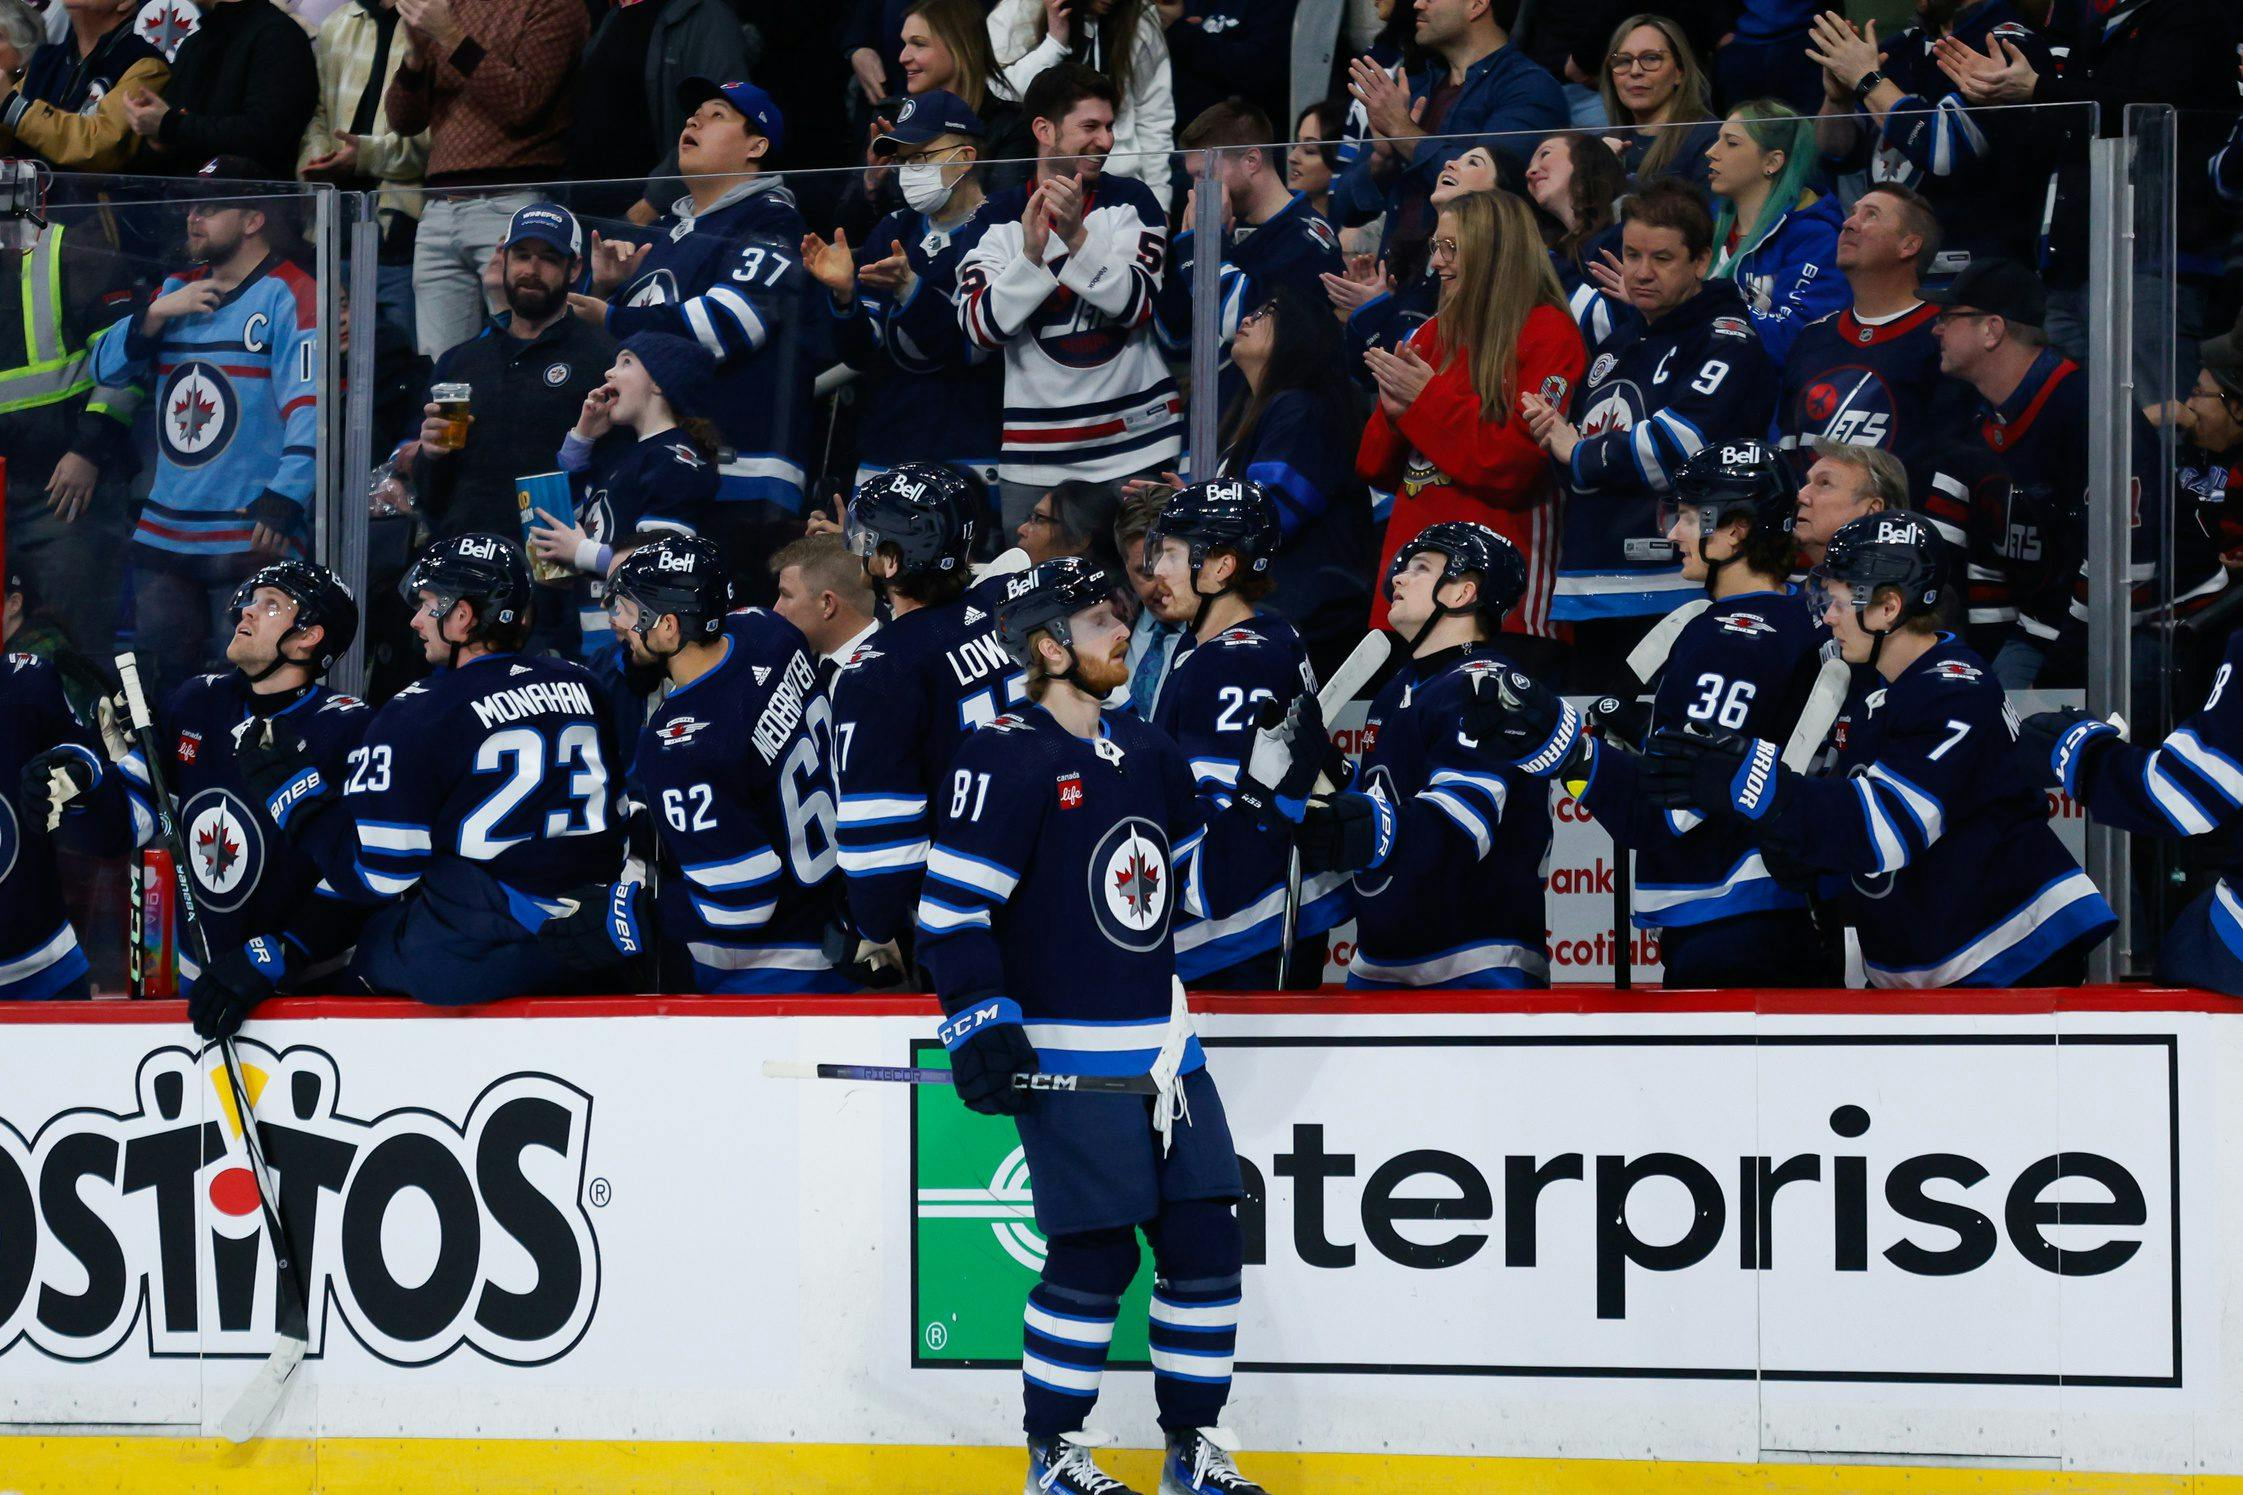 ‘This is a strong NHL market’: NHL commissioner Gary Bettman downplays Jets attendance concerns